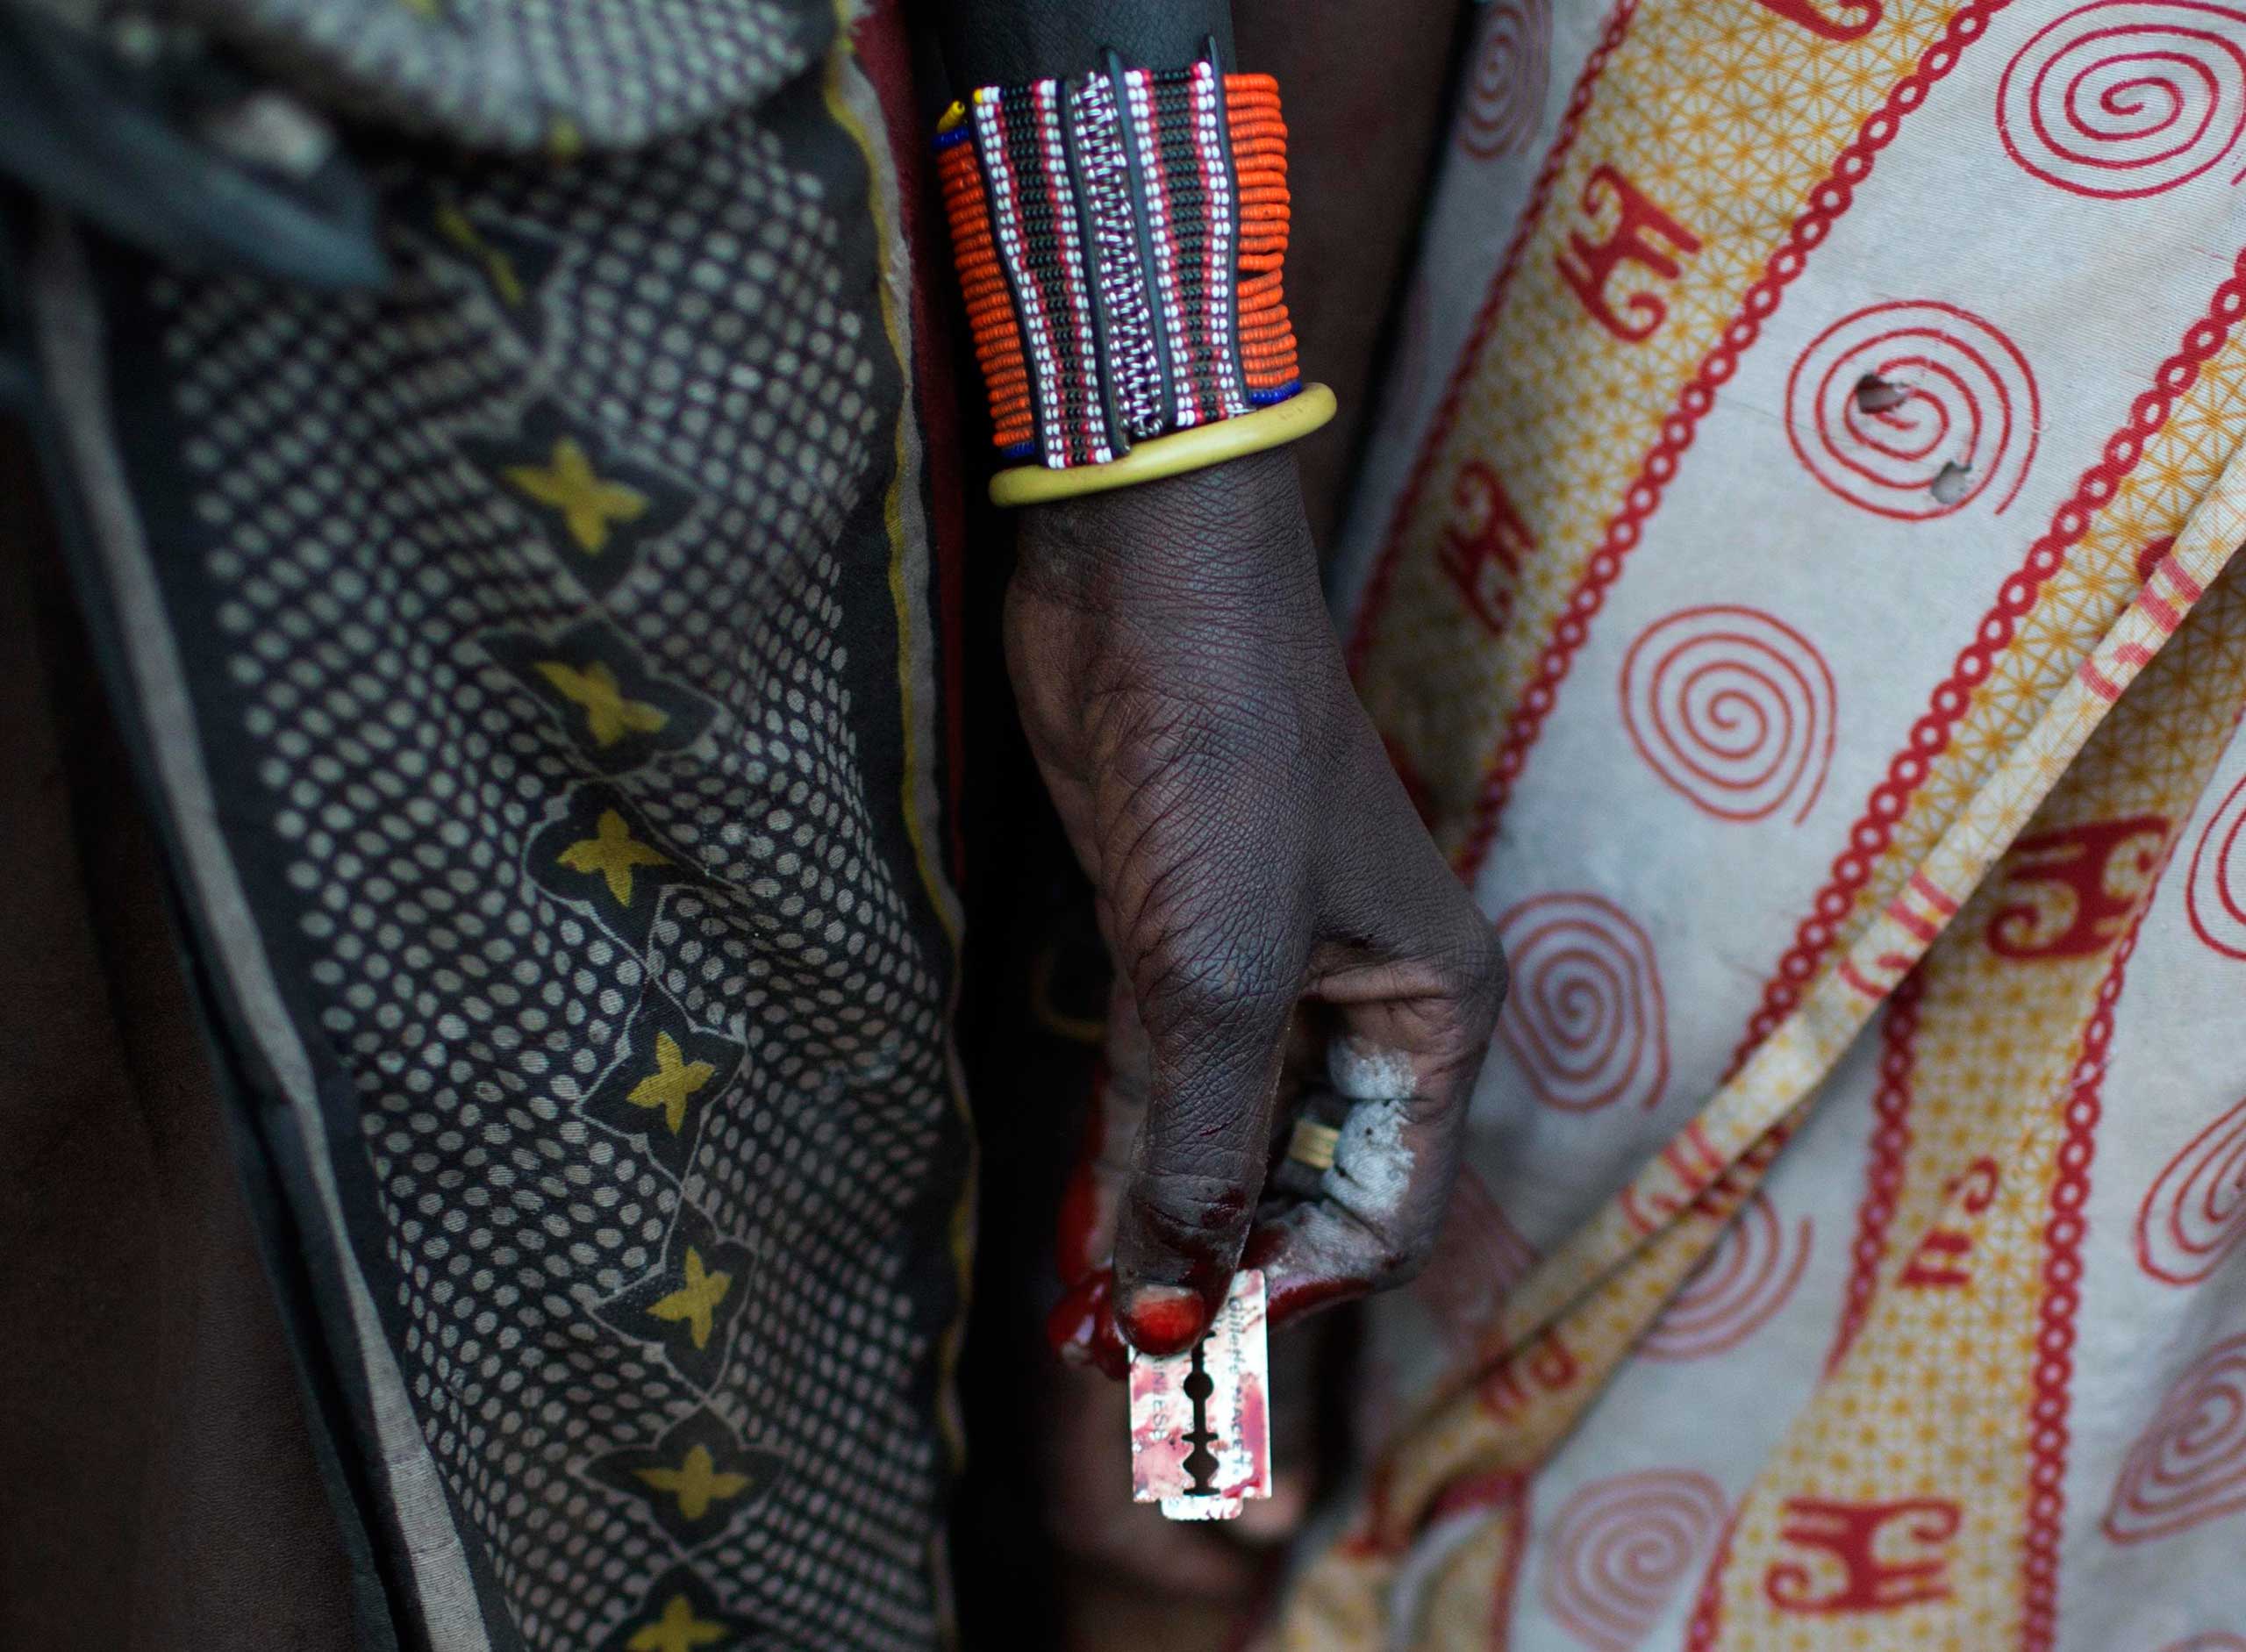 A Pokot woman holds a razor blade after performing a circumcision on four girls in a village about 80 kilometres from the town of Marigat in Baringo County, Kenya, Oct. 16, 2014. (Siegfried Modola—Reuters)